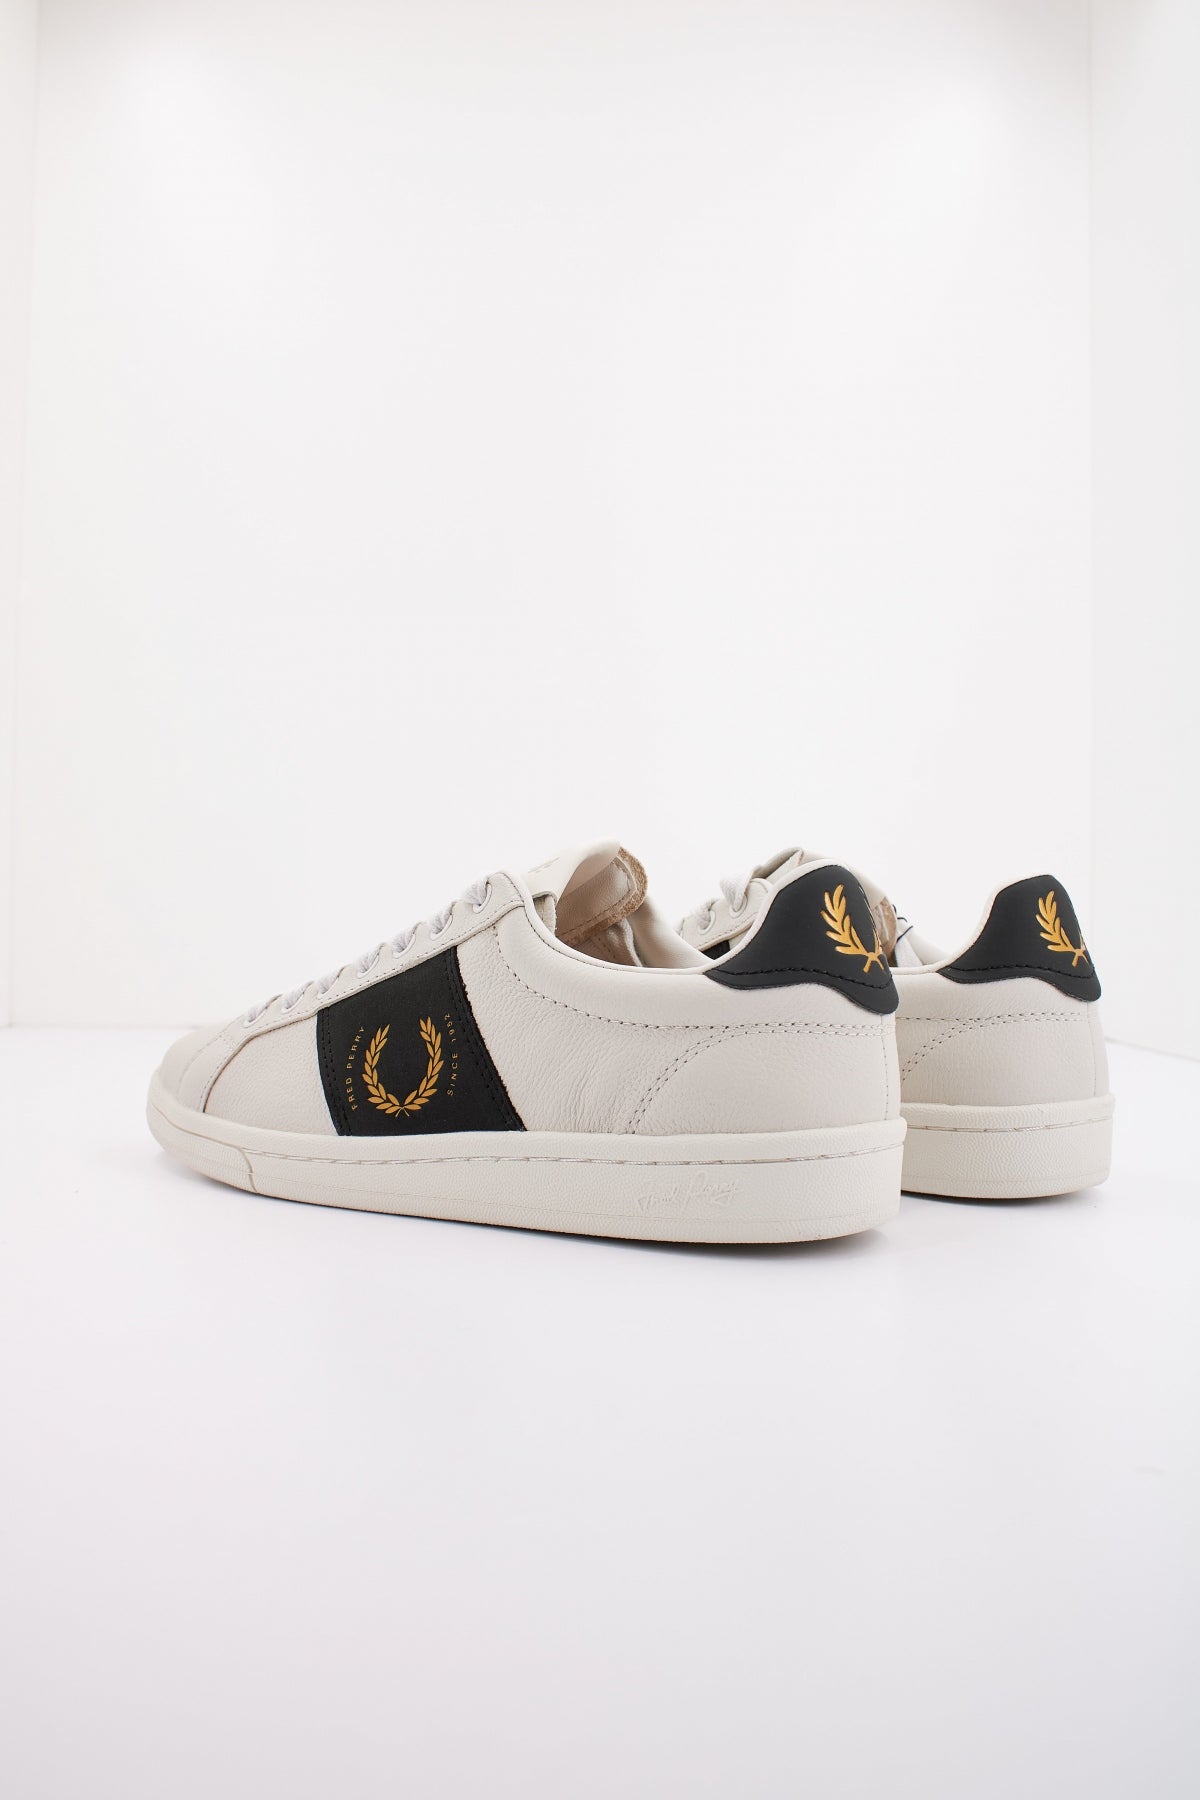 FRED PERRY LEATHER/BRANDED en color BEIS  (3)